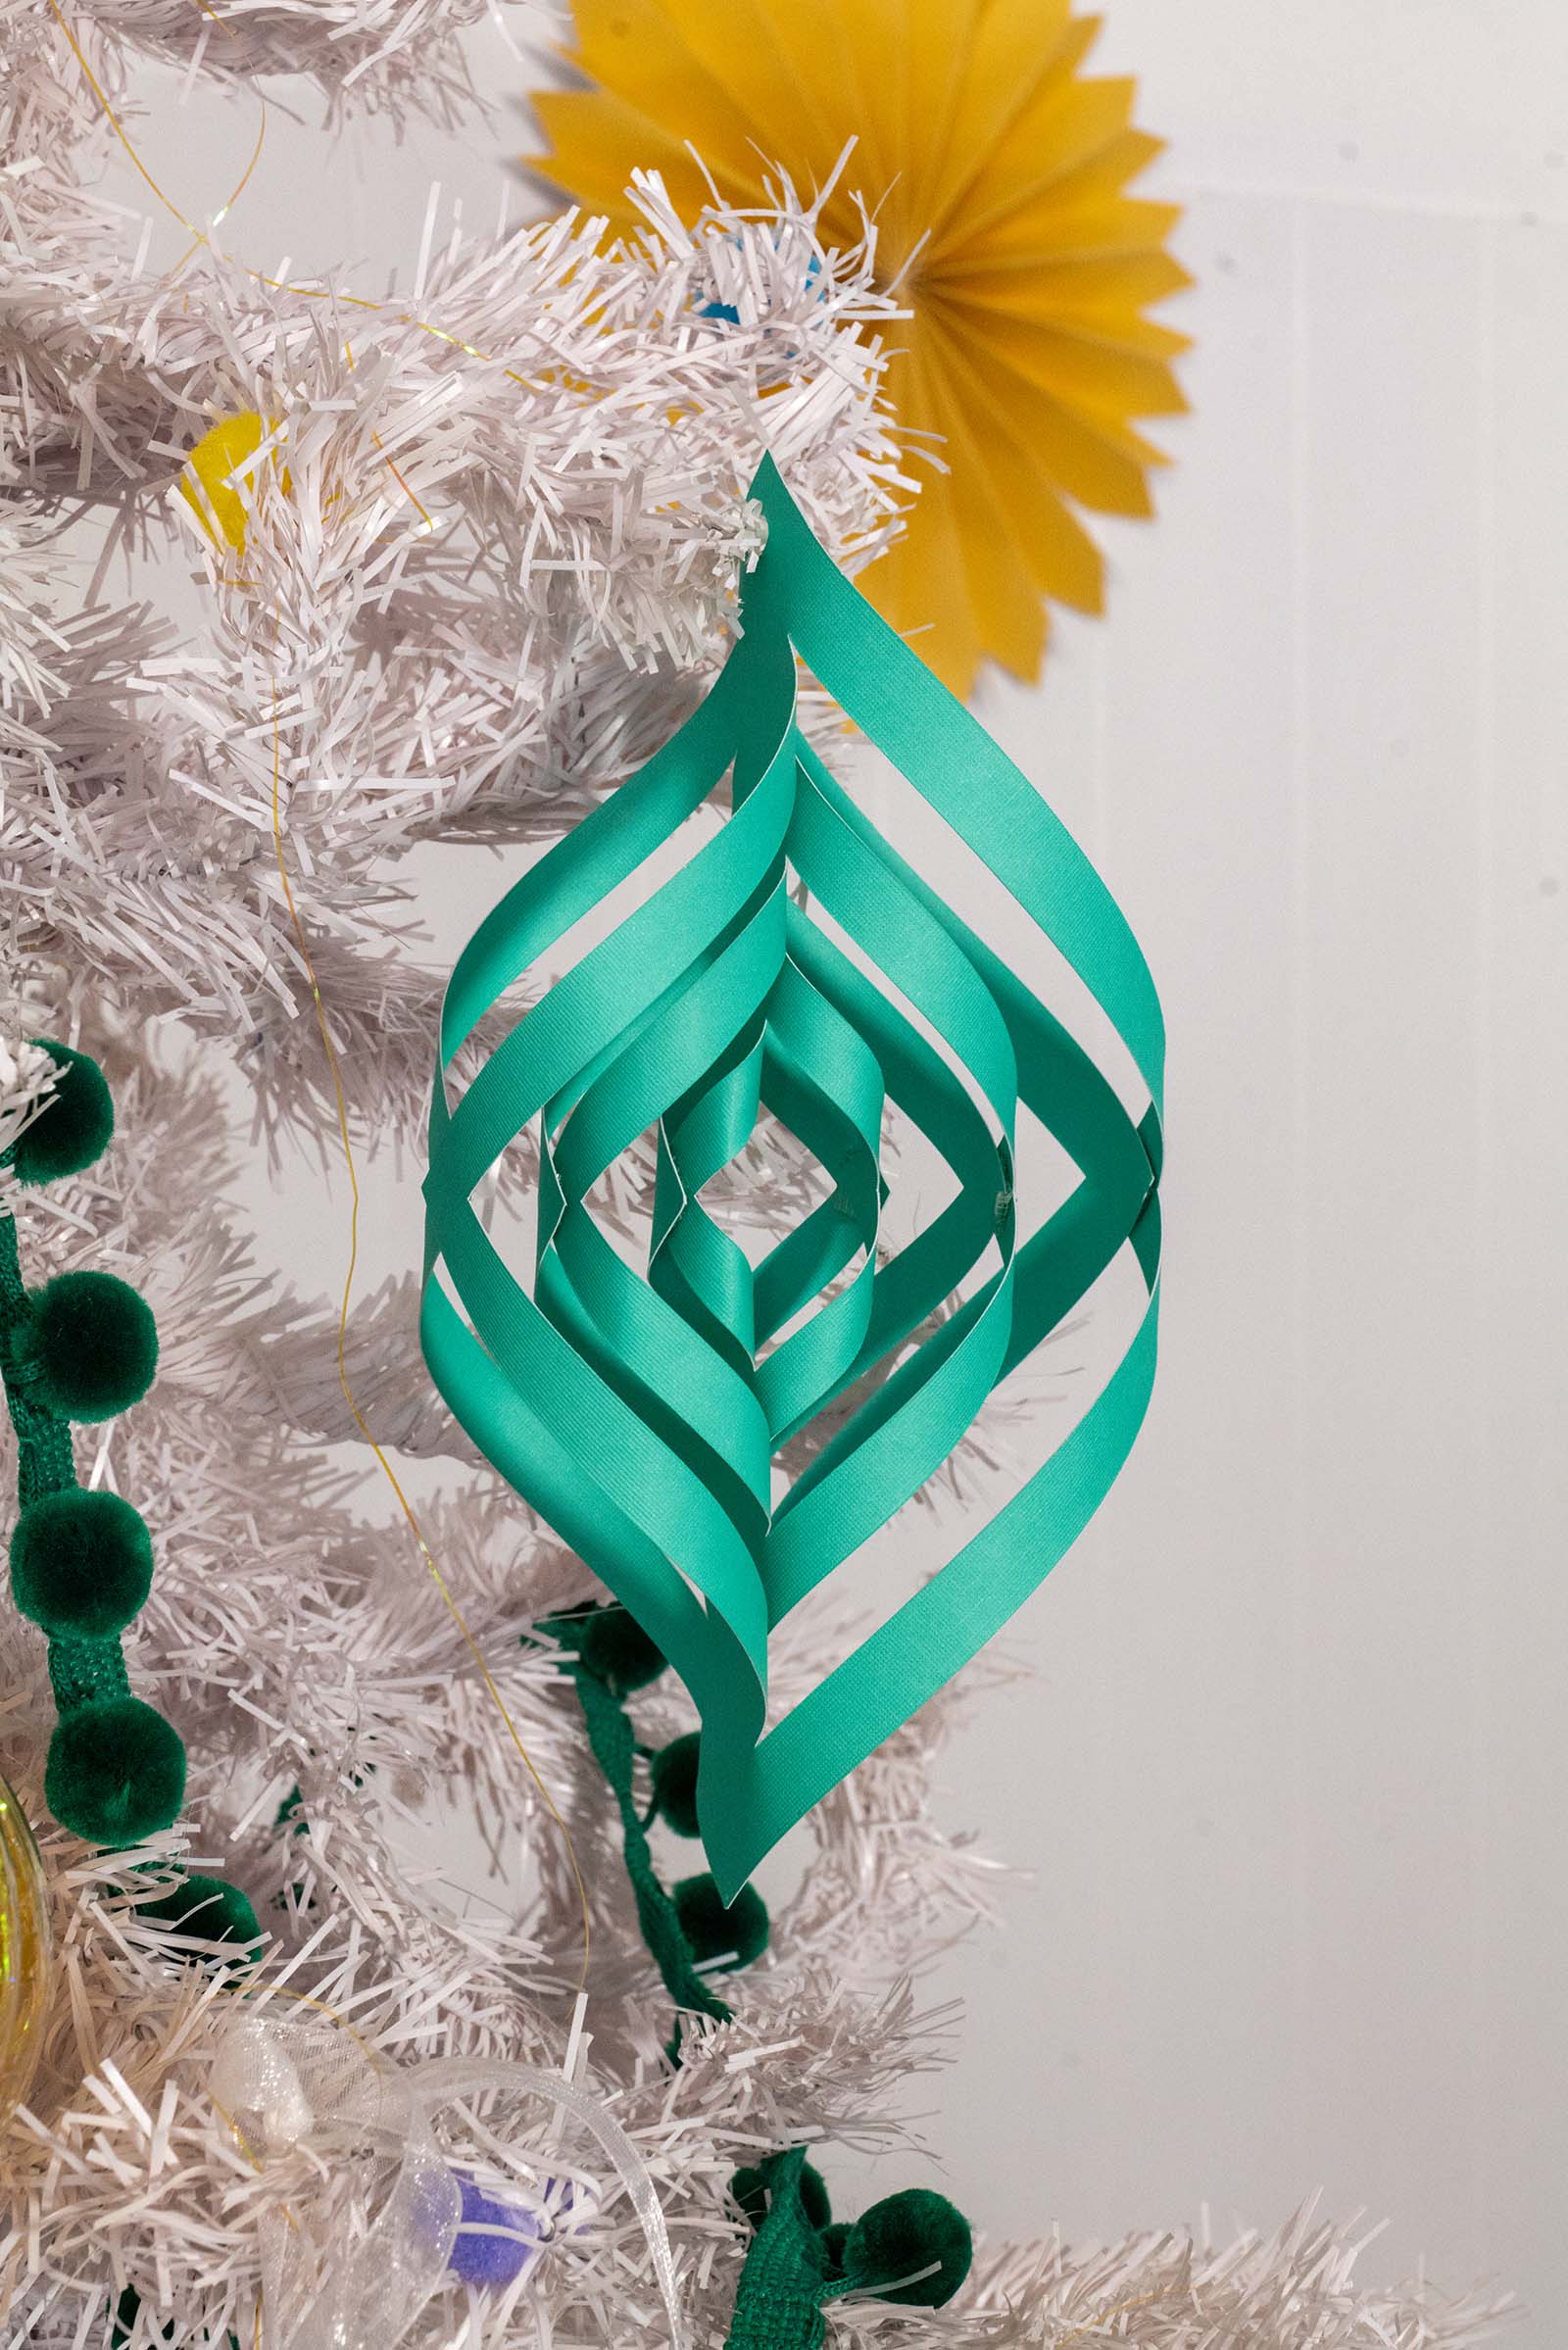 green 3D paper pendant hanging on christmas tree